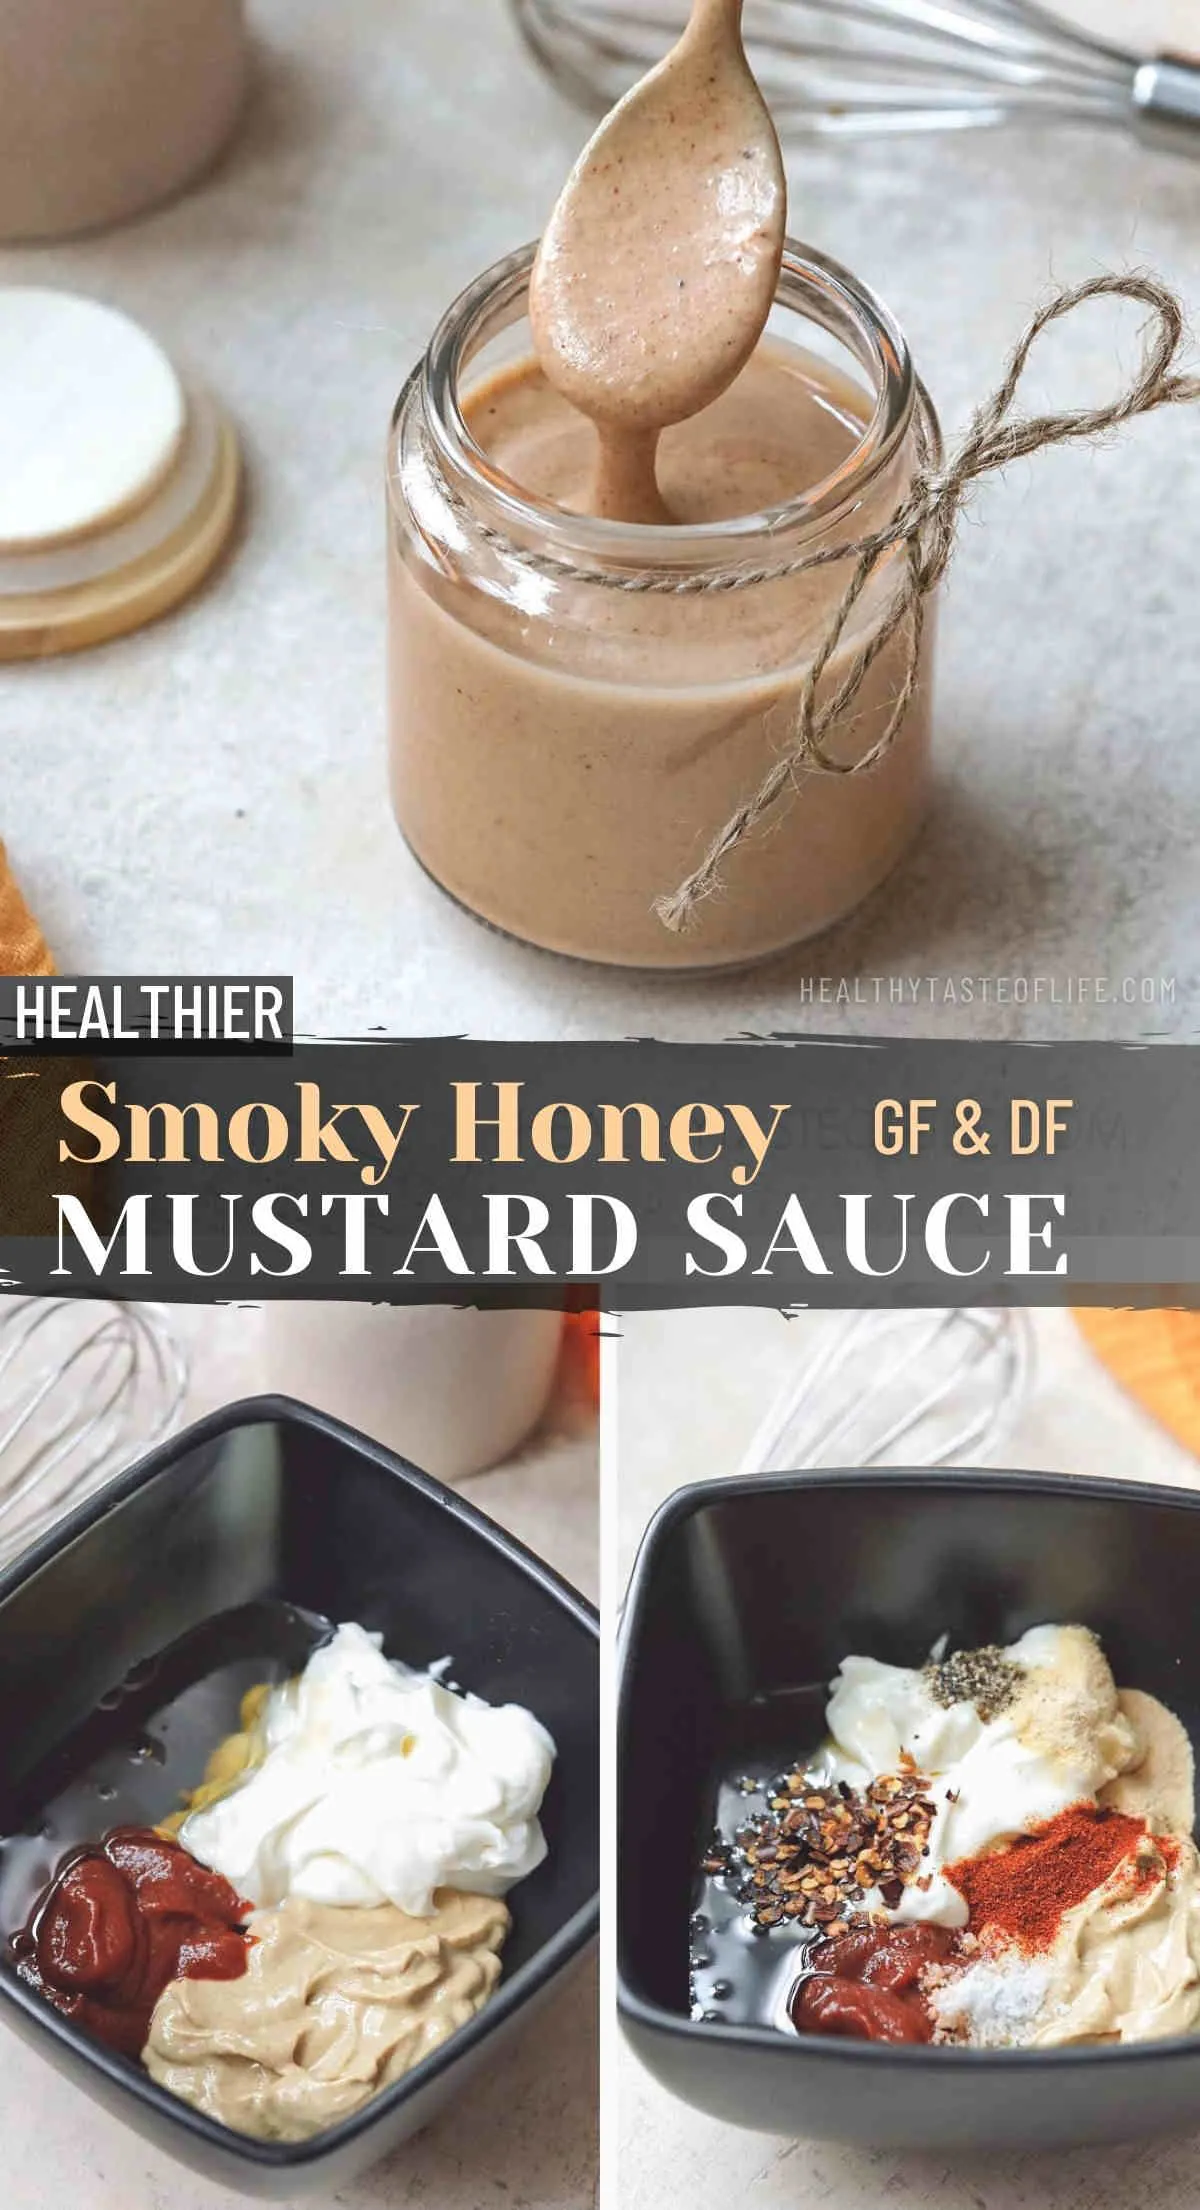 This smoky honey mustard sauce is a great way to add some flavor to your food. The sauce can be used on anything from chicken to vegetables. The best part about this smoky honey mustard sauce recipe is naturally dairy free, very easy to make and requires only a few minutes. Vegan option available as well! #honeymustard #smokyhoneymustard #mustardsauce #honeymustardrecipe